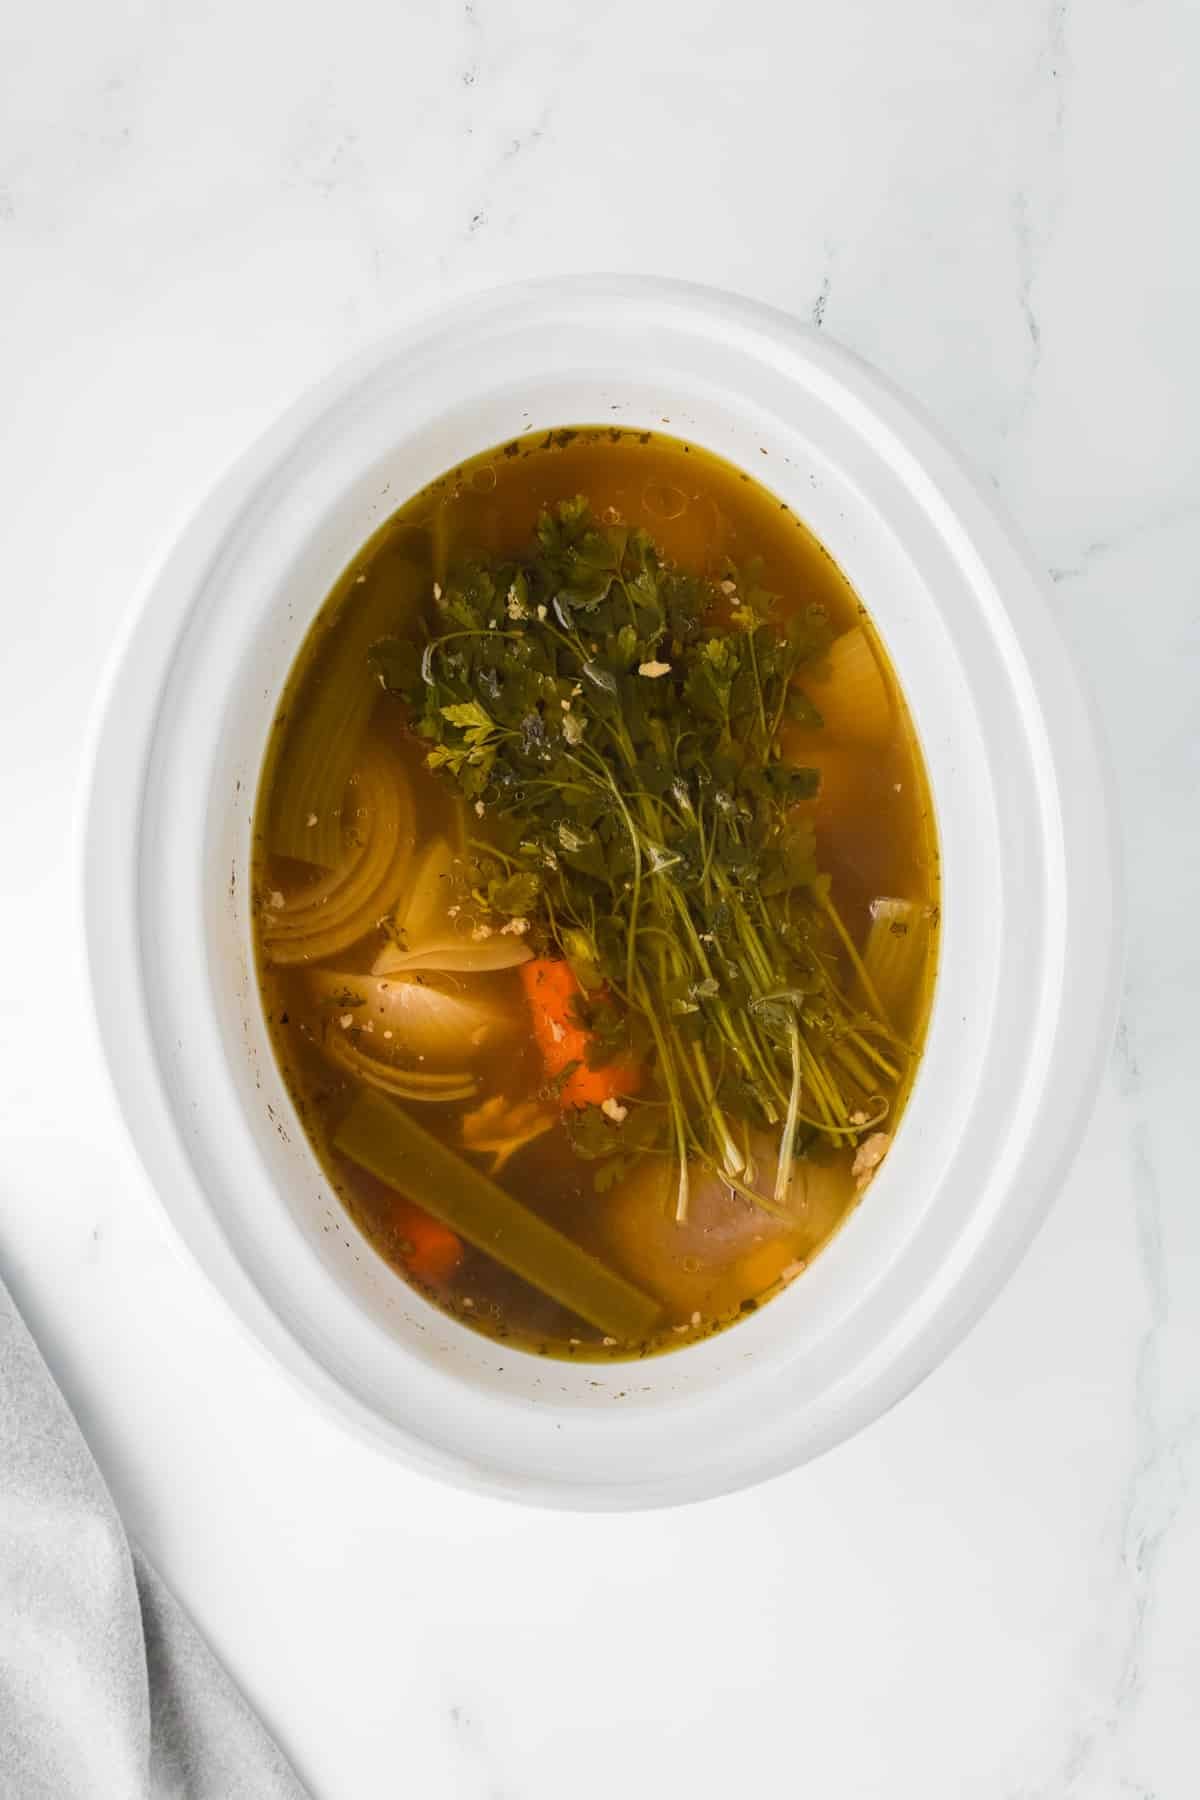 A slow cooker filled with broth with vegetables and parsley.